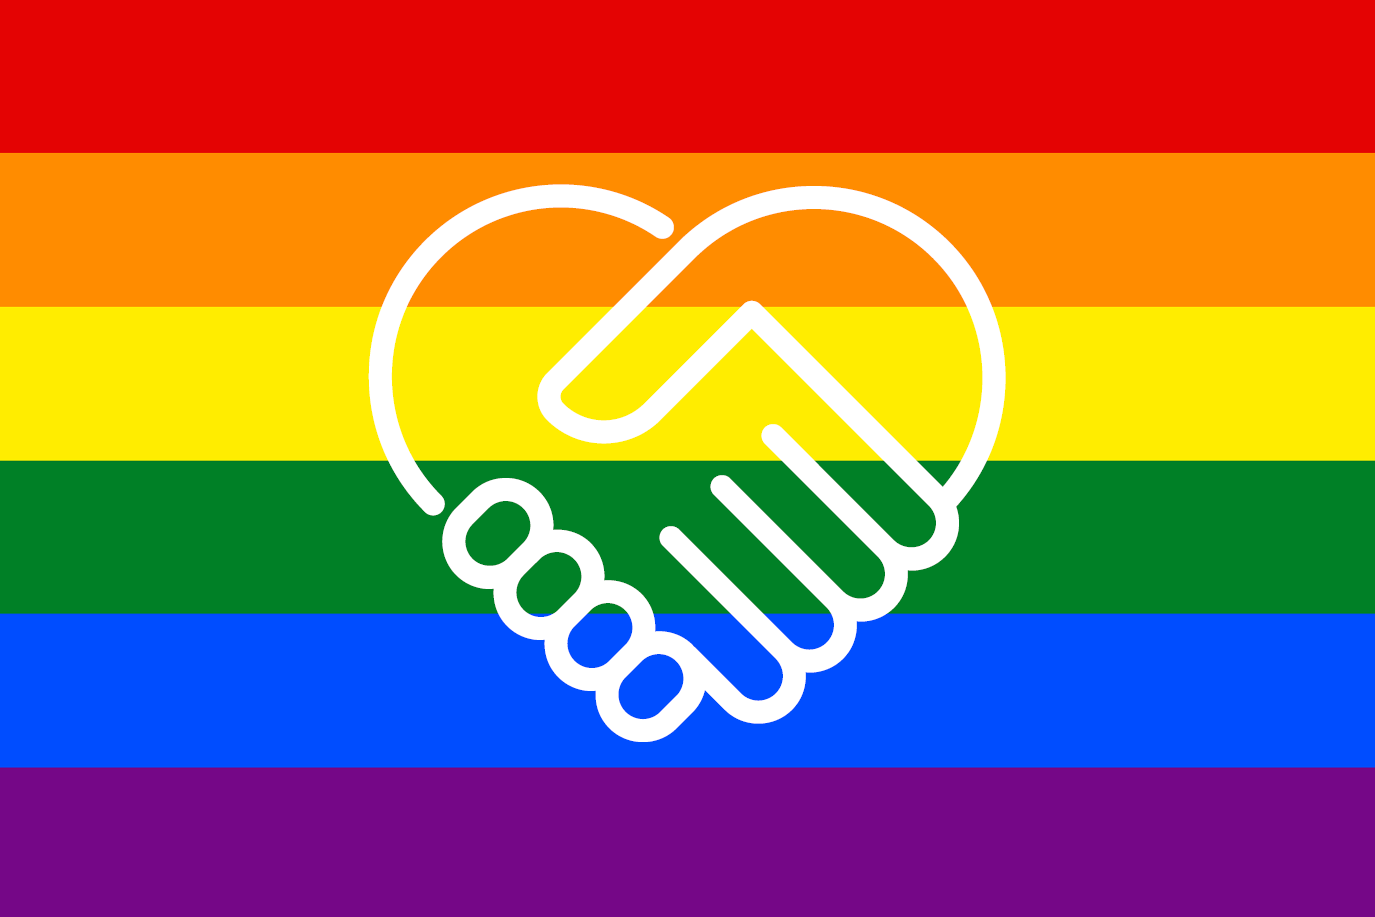 Equality Logo - CARE Australia supports marriage equality - CARE Australia - CARE ...